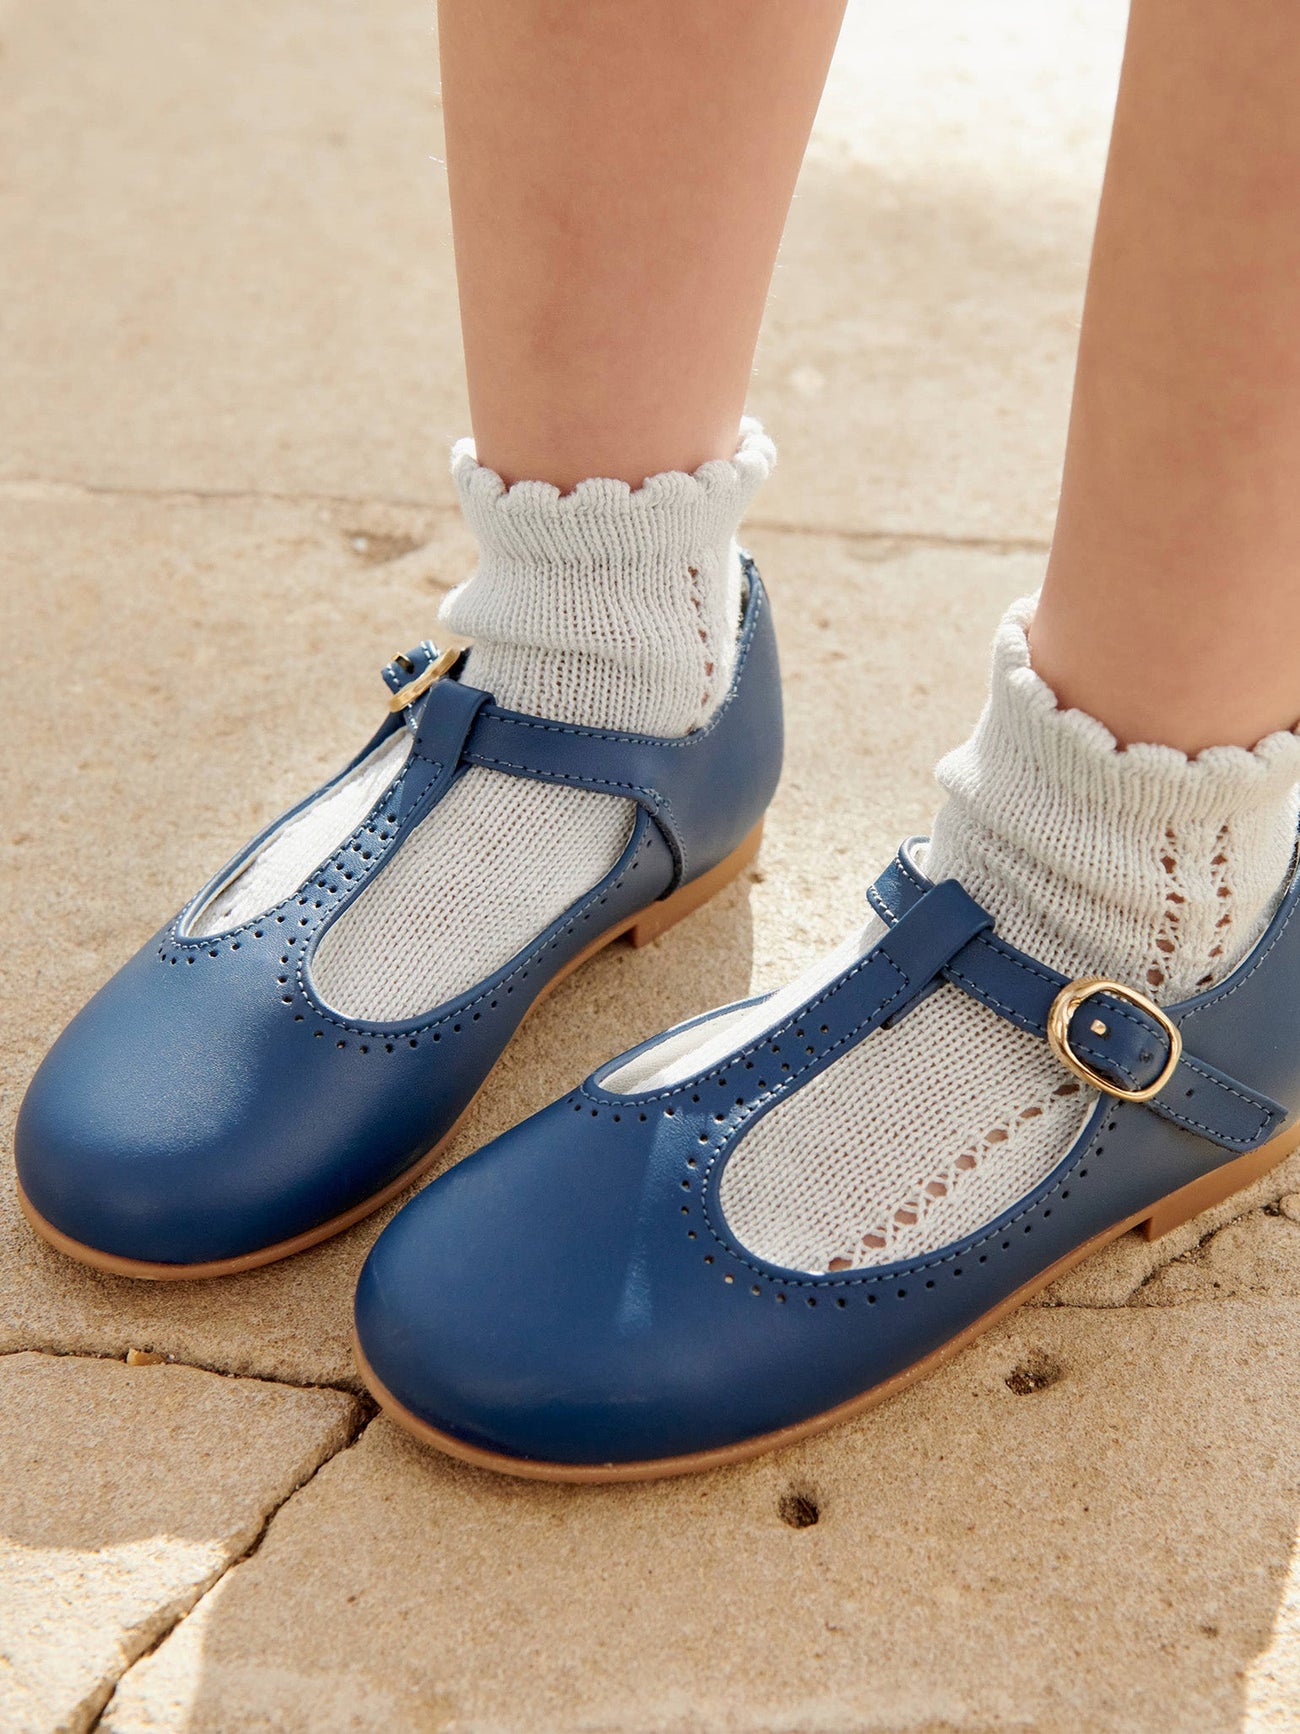 Cobalt Leather Girl T-Bar Shoes